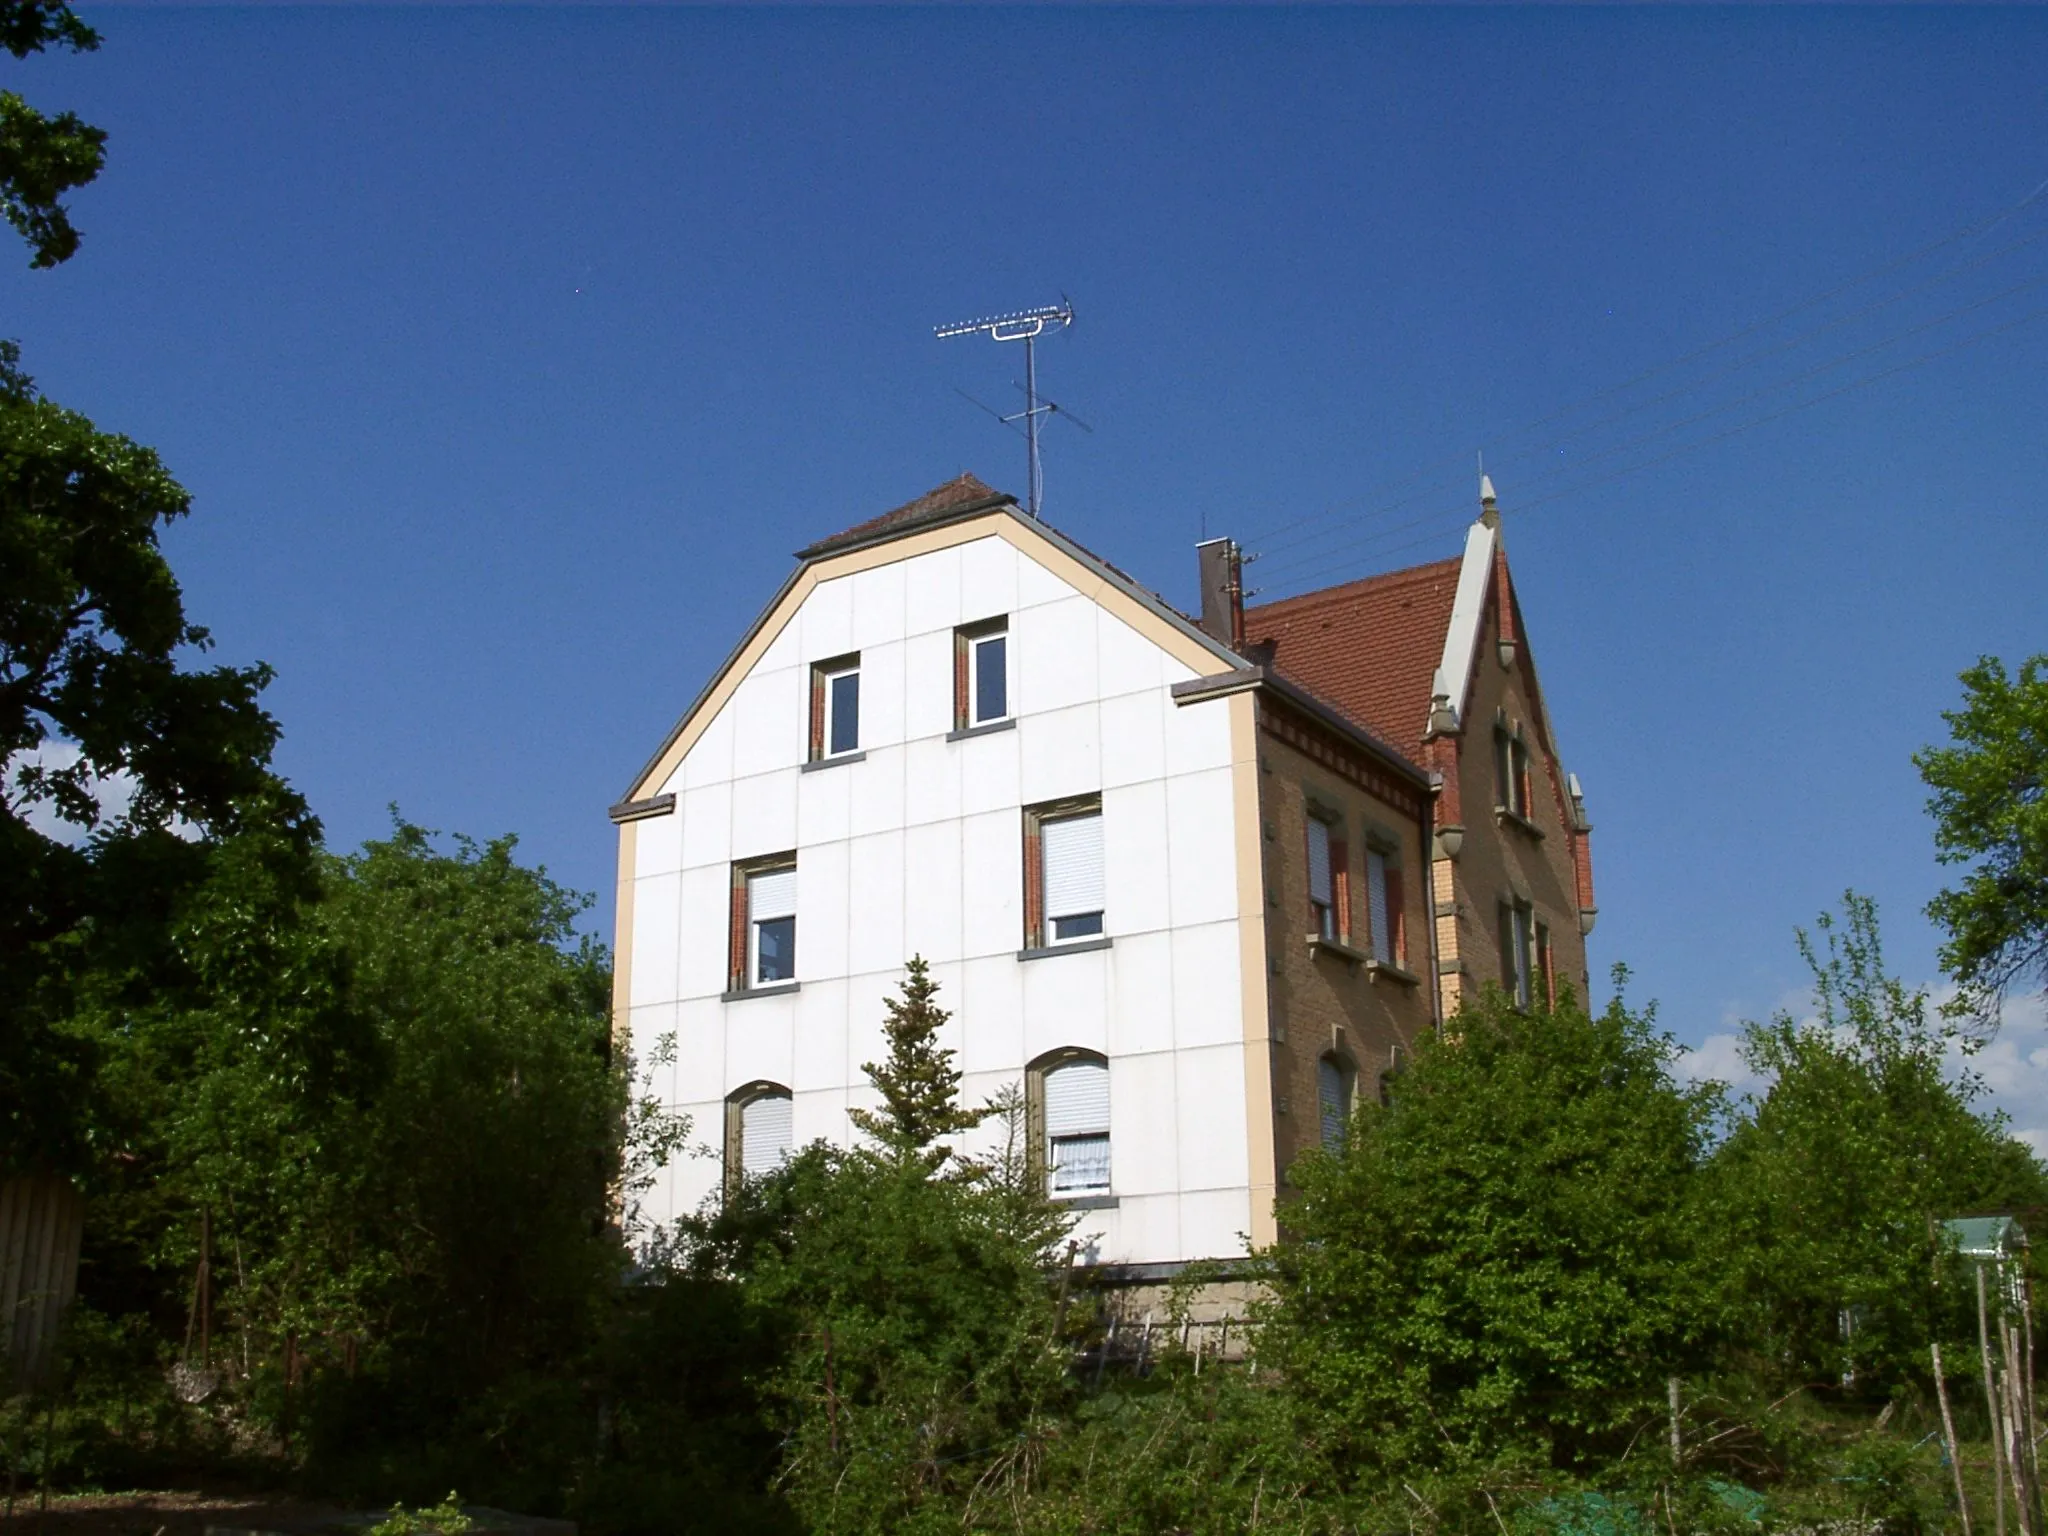 Photo showing: Western side of the parsonage of Schwalldorf, a suburban district of Rottenburg am Neckar in the German state of Baden-Württemberg. The brick building was built at the beginning of the 20th century (1905?). The west facade of the building was renovated a few years ago.